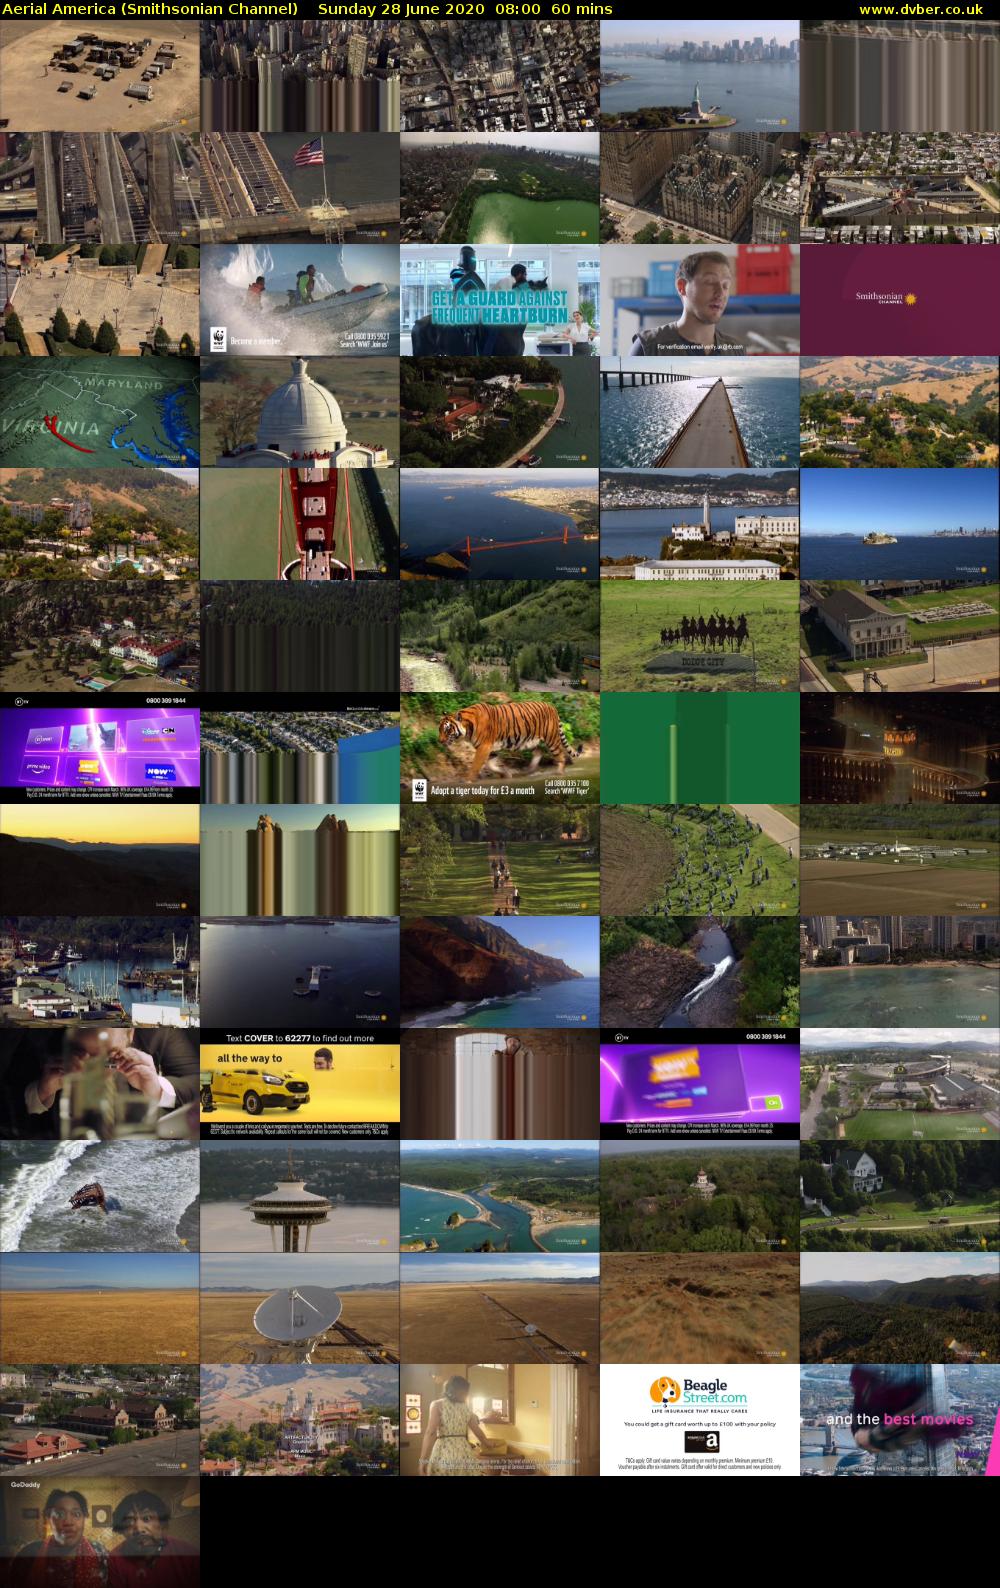 Aerial America (Smithsonian Channel) Sunday 28 June 2020 08:00 - 09:00